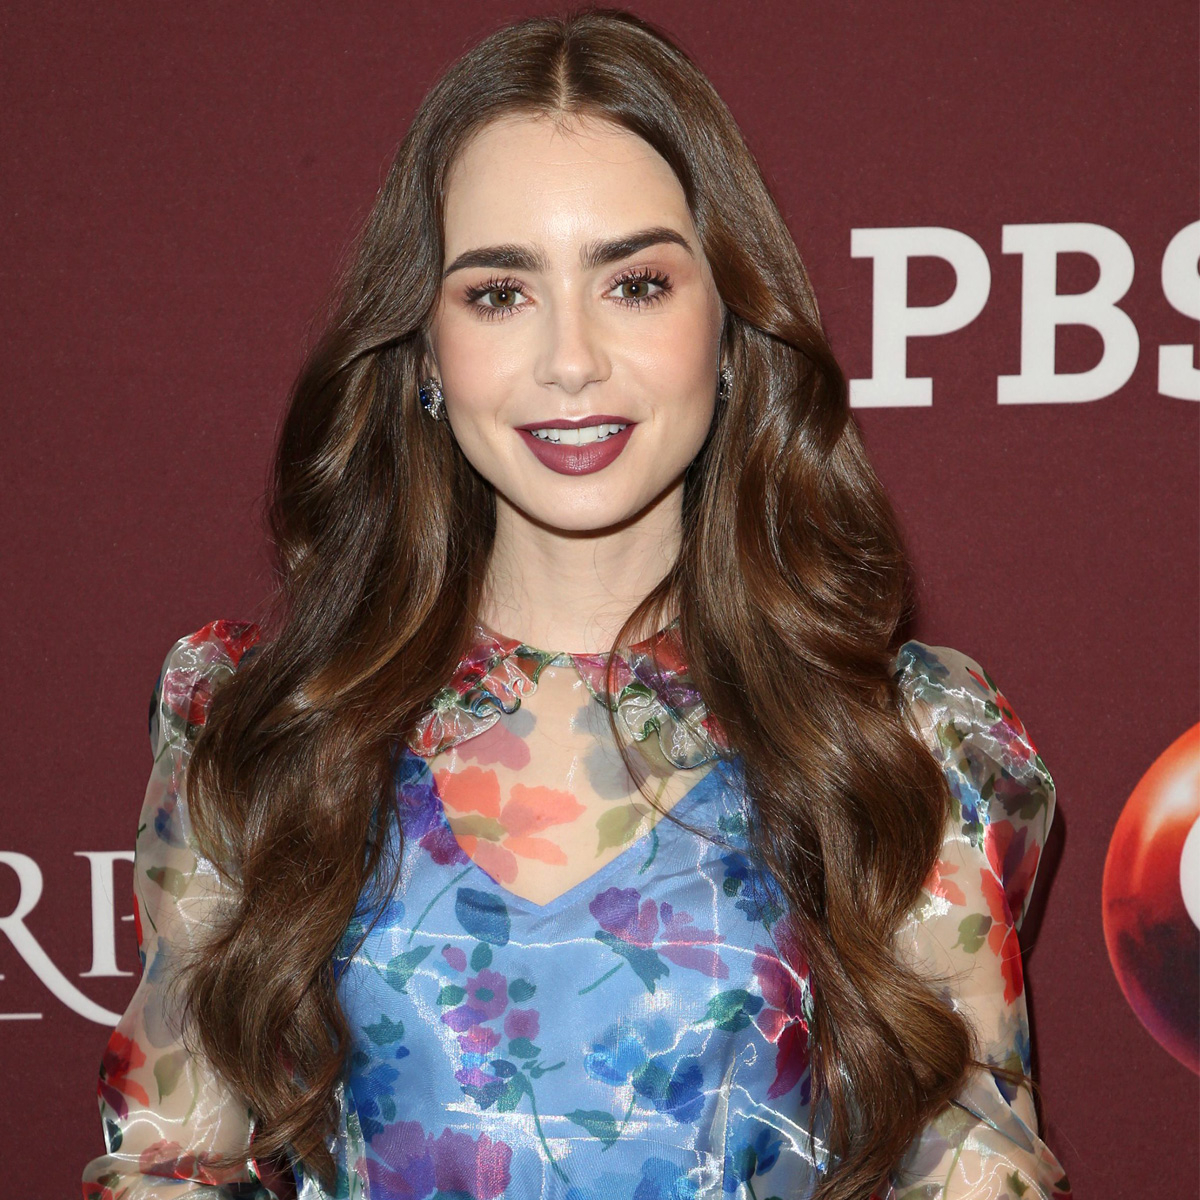 Lily Collins net worth: How much does the actress earn per episode